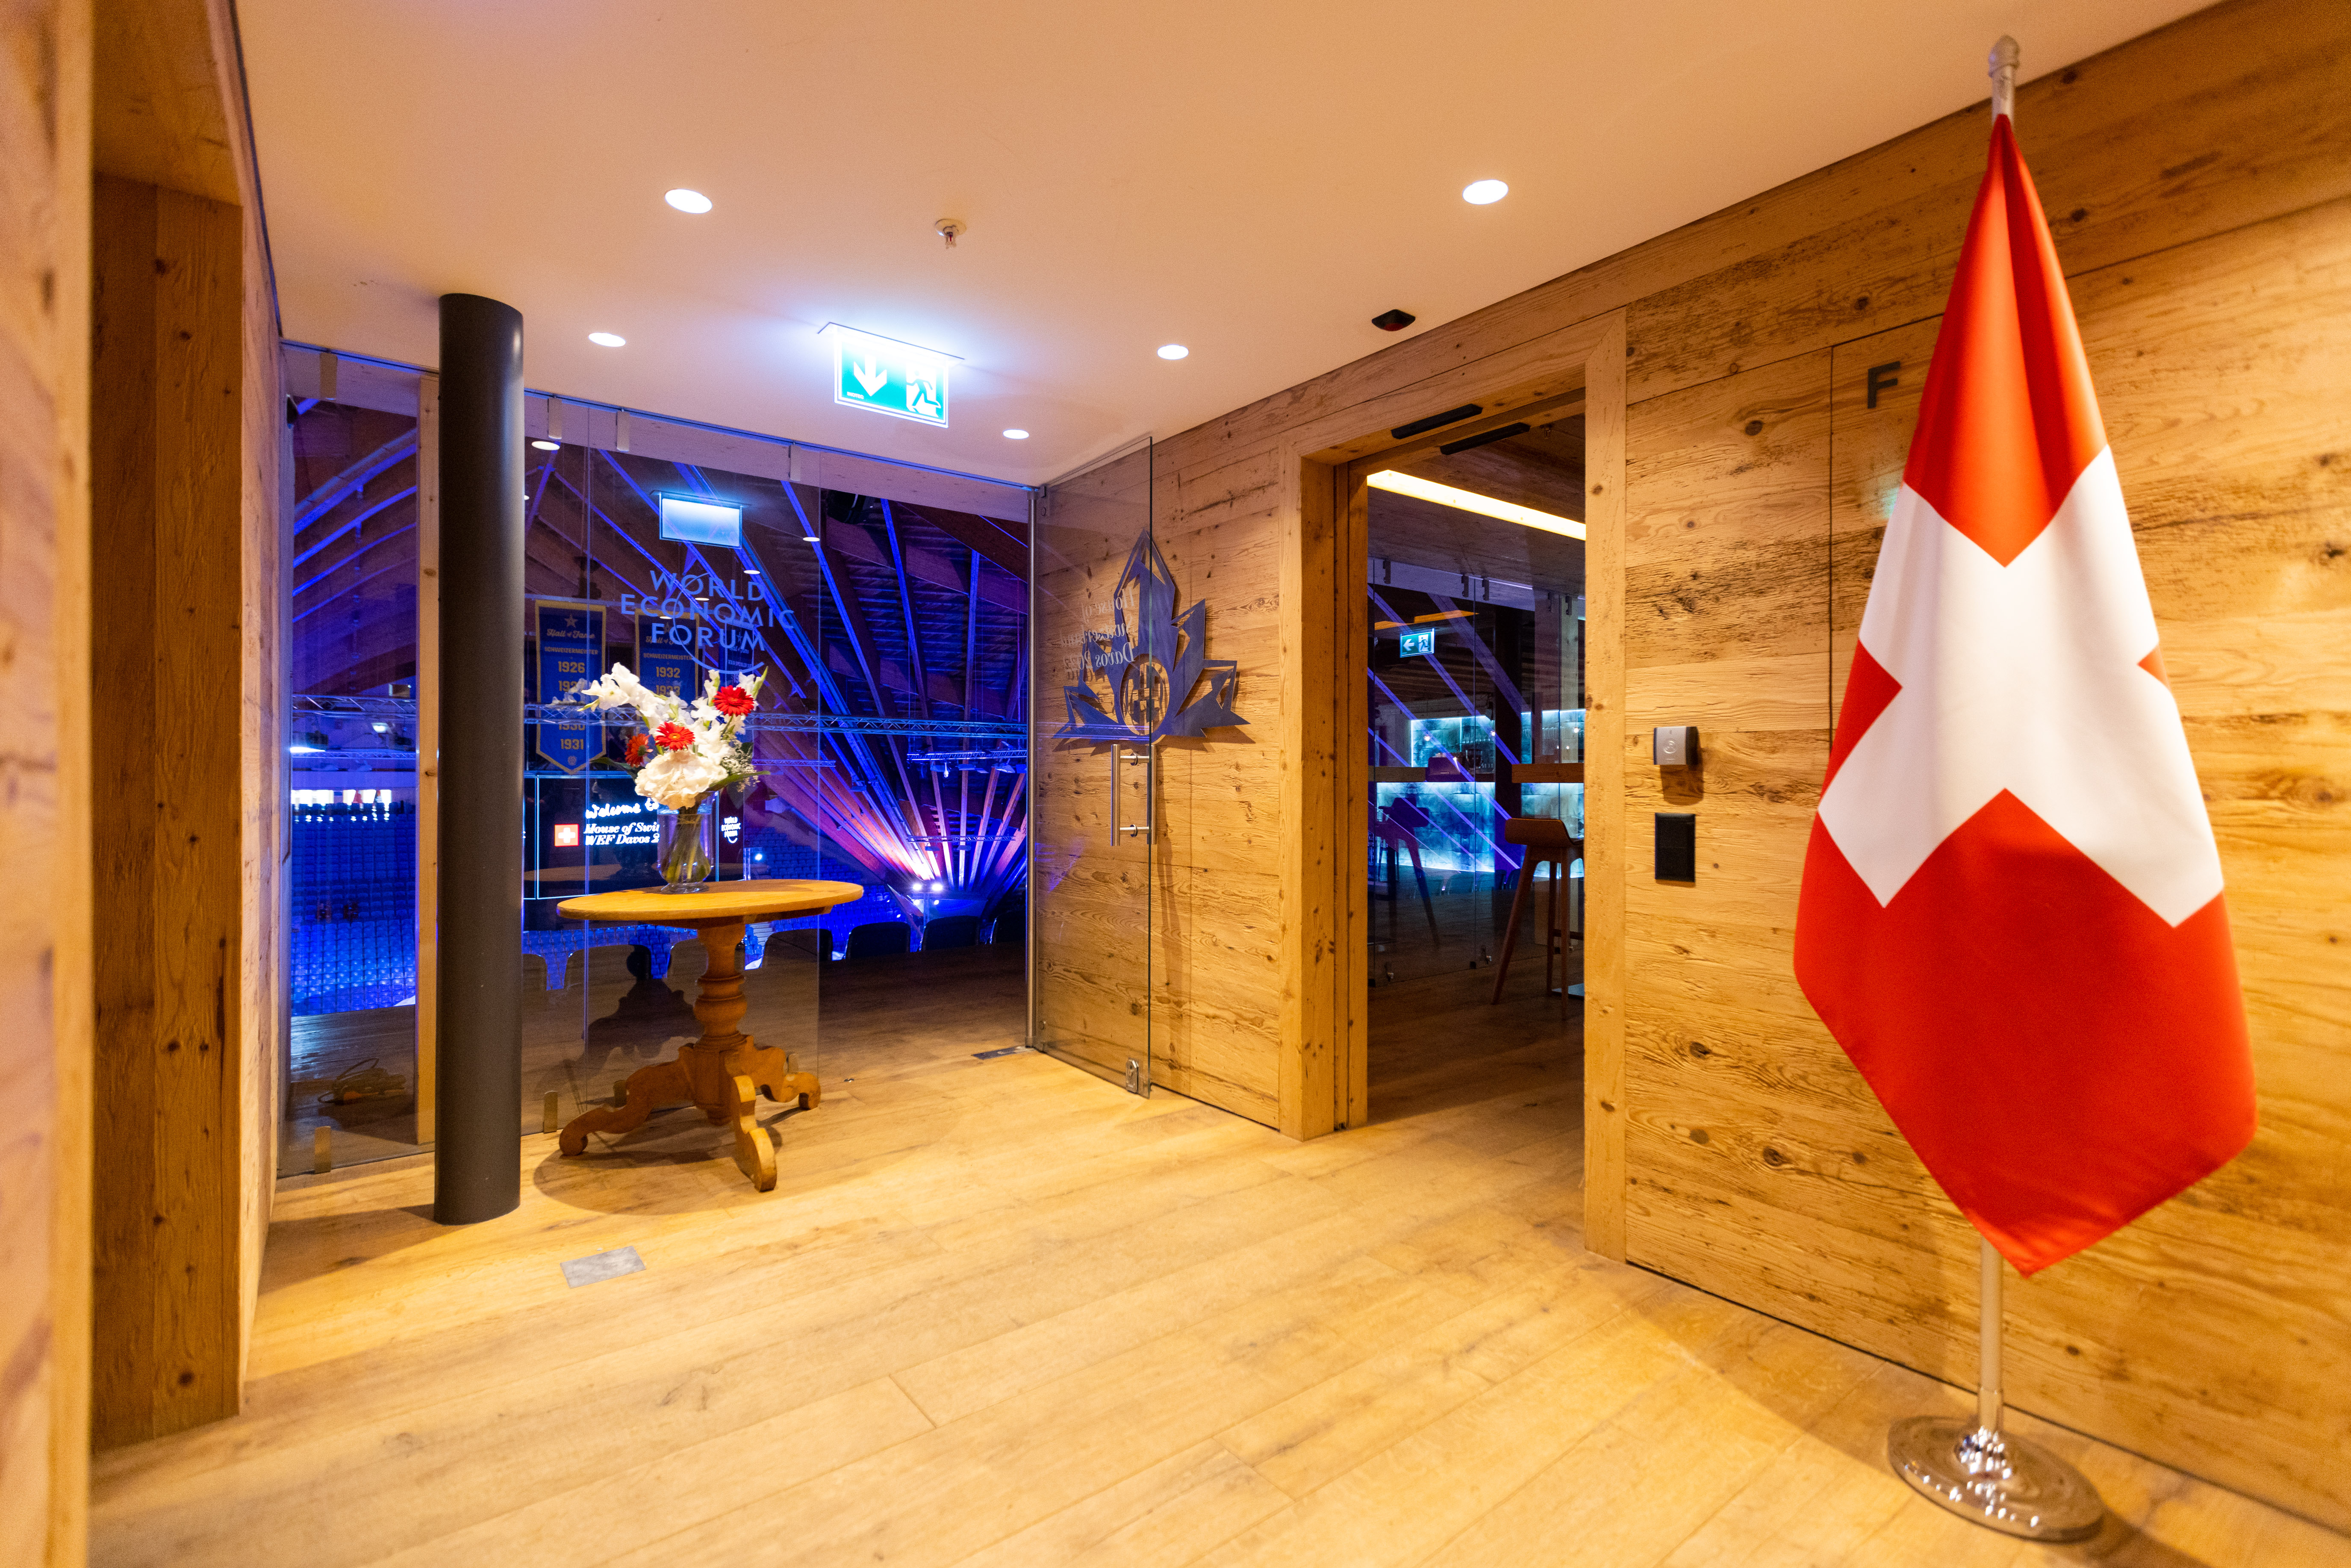 A Swiss flag adorns the spaces of the House of Switzerland WEF 22